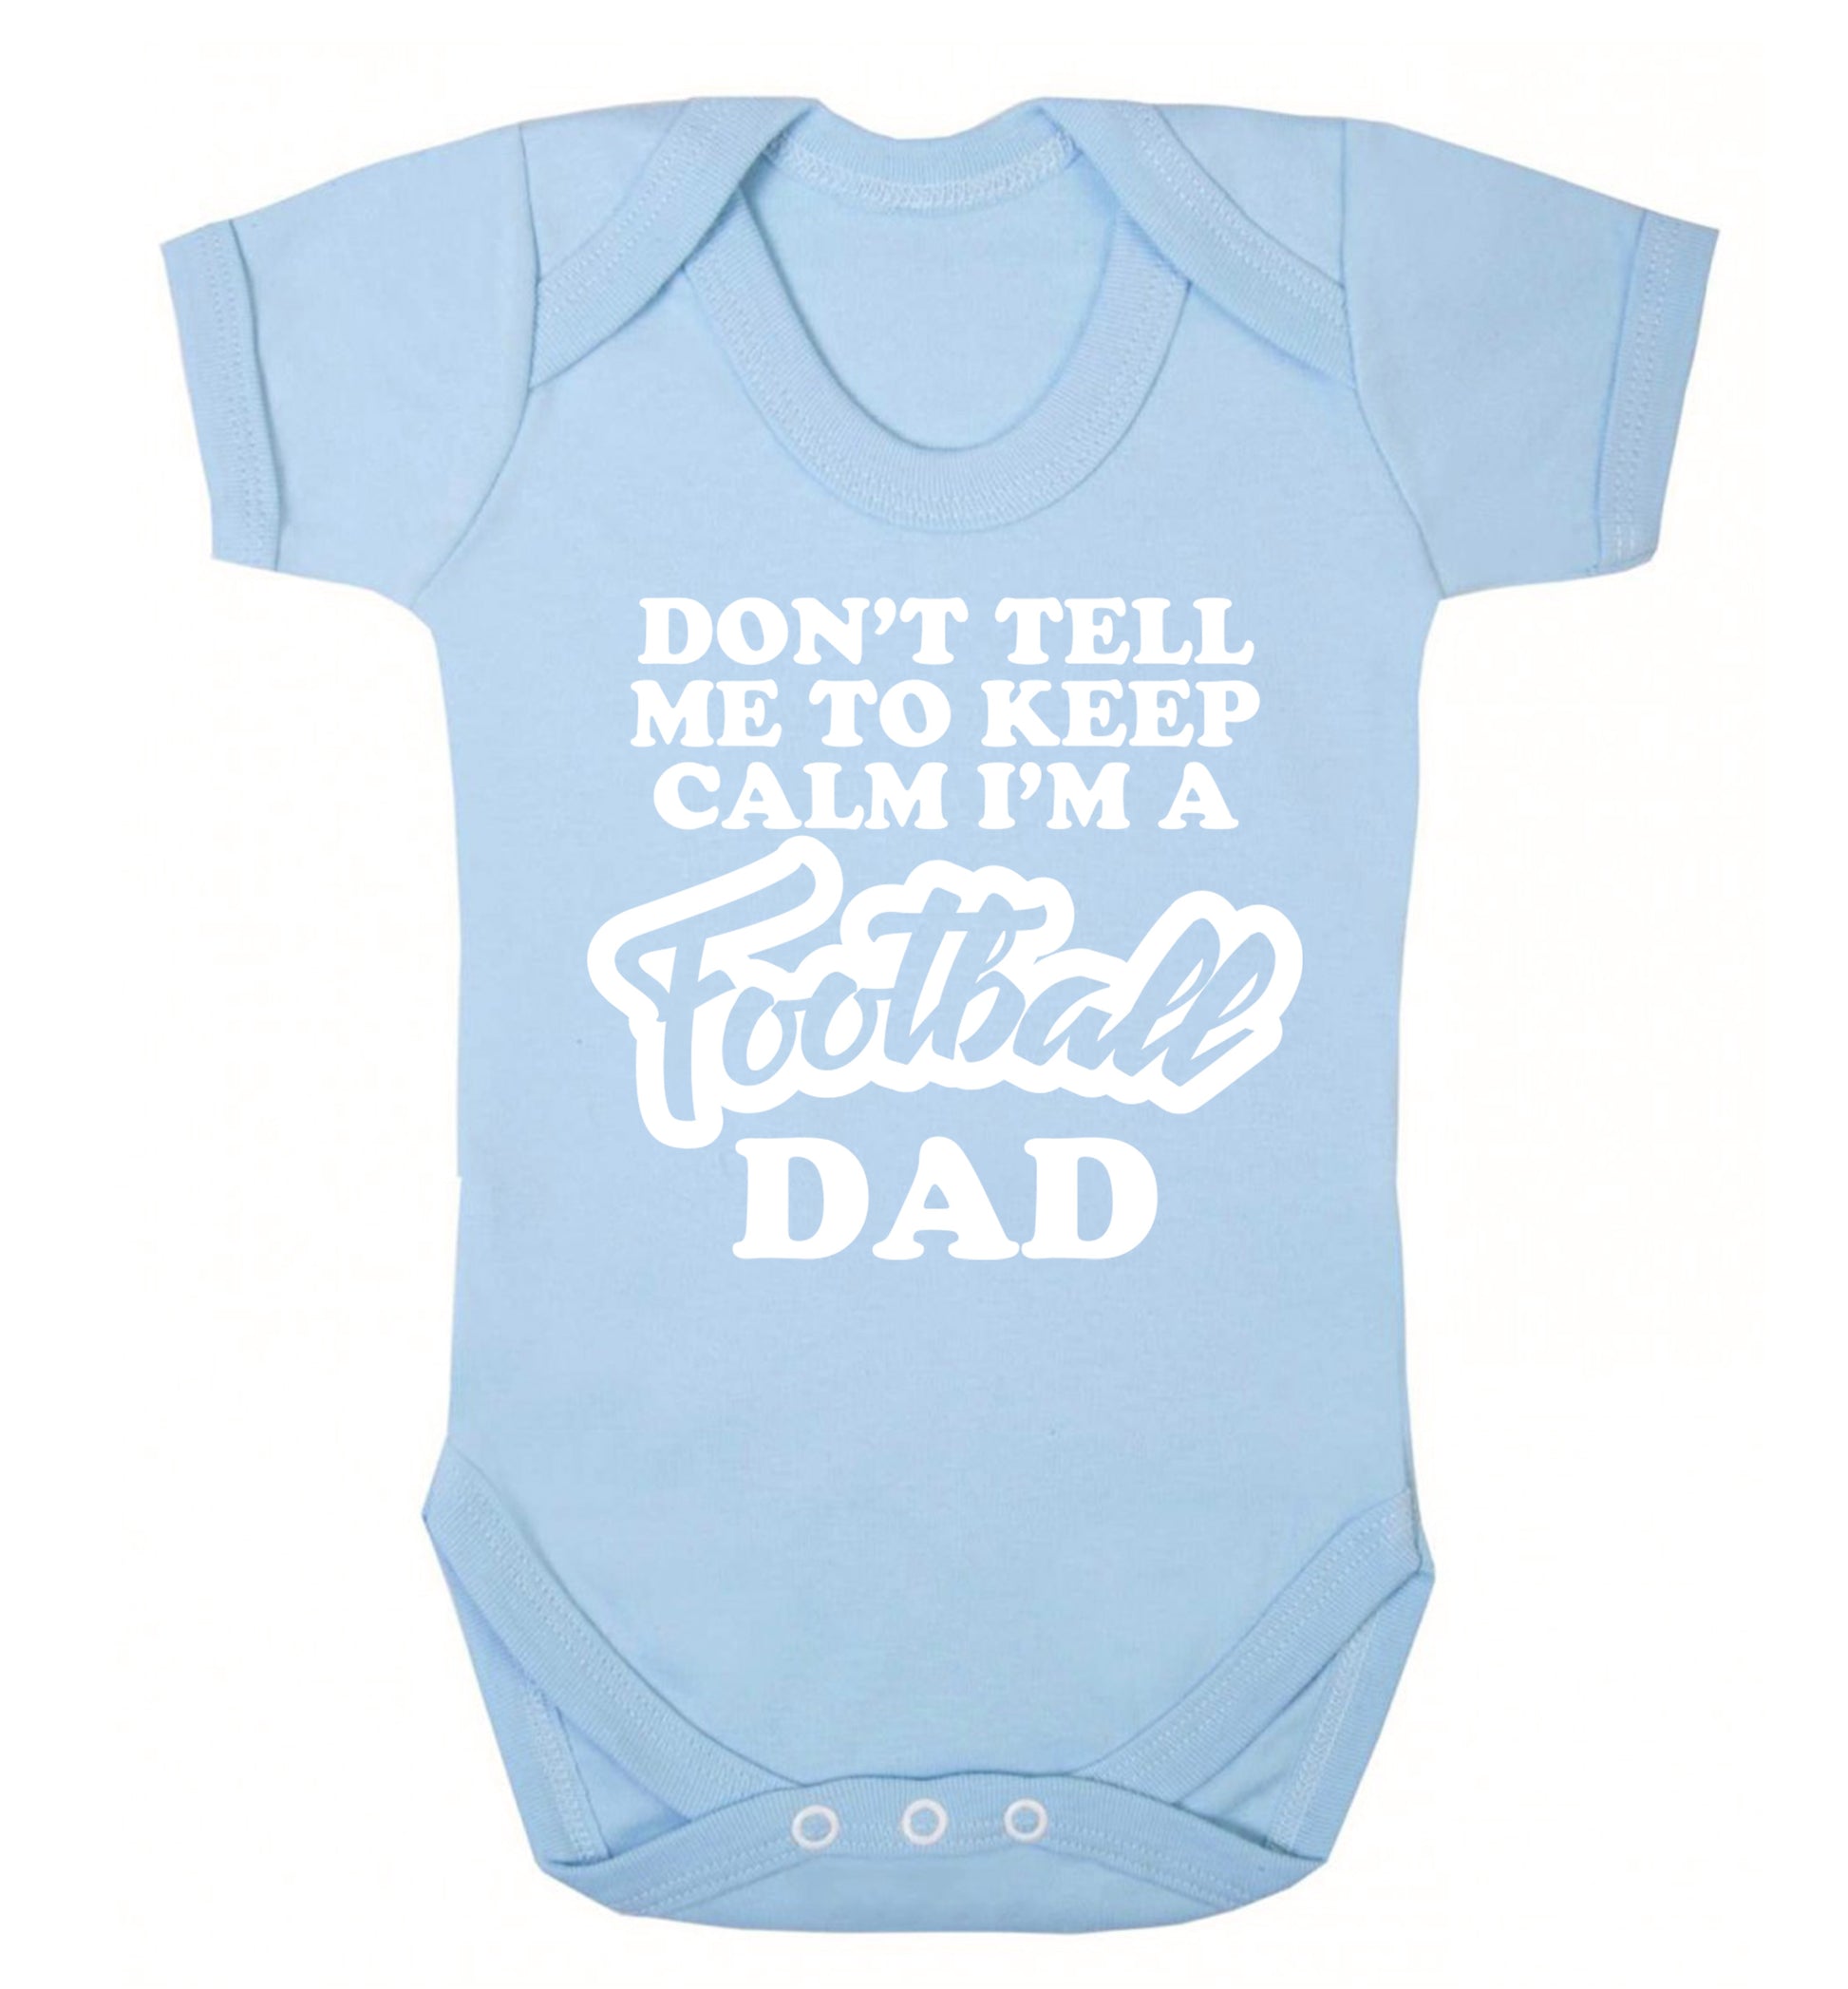 Don't tell me to keep calm I'm a football grandad Baby Vest pale blue 18-24 months